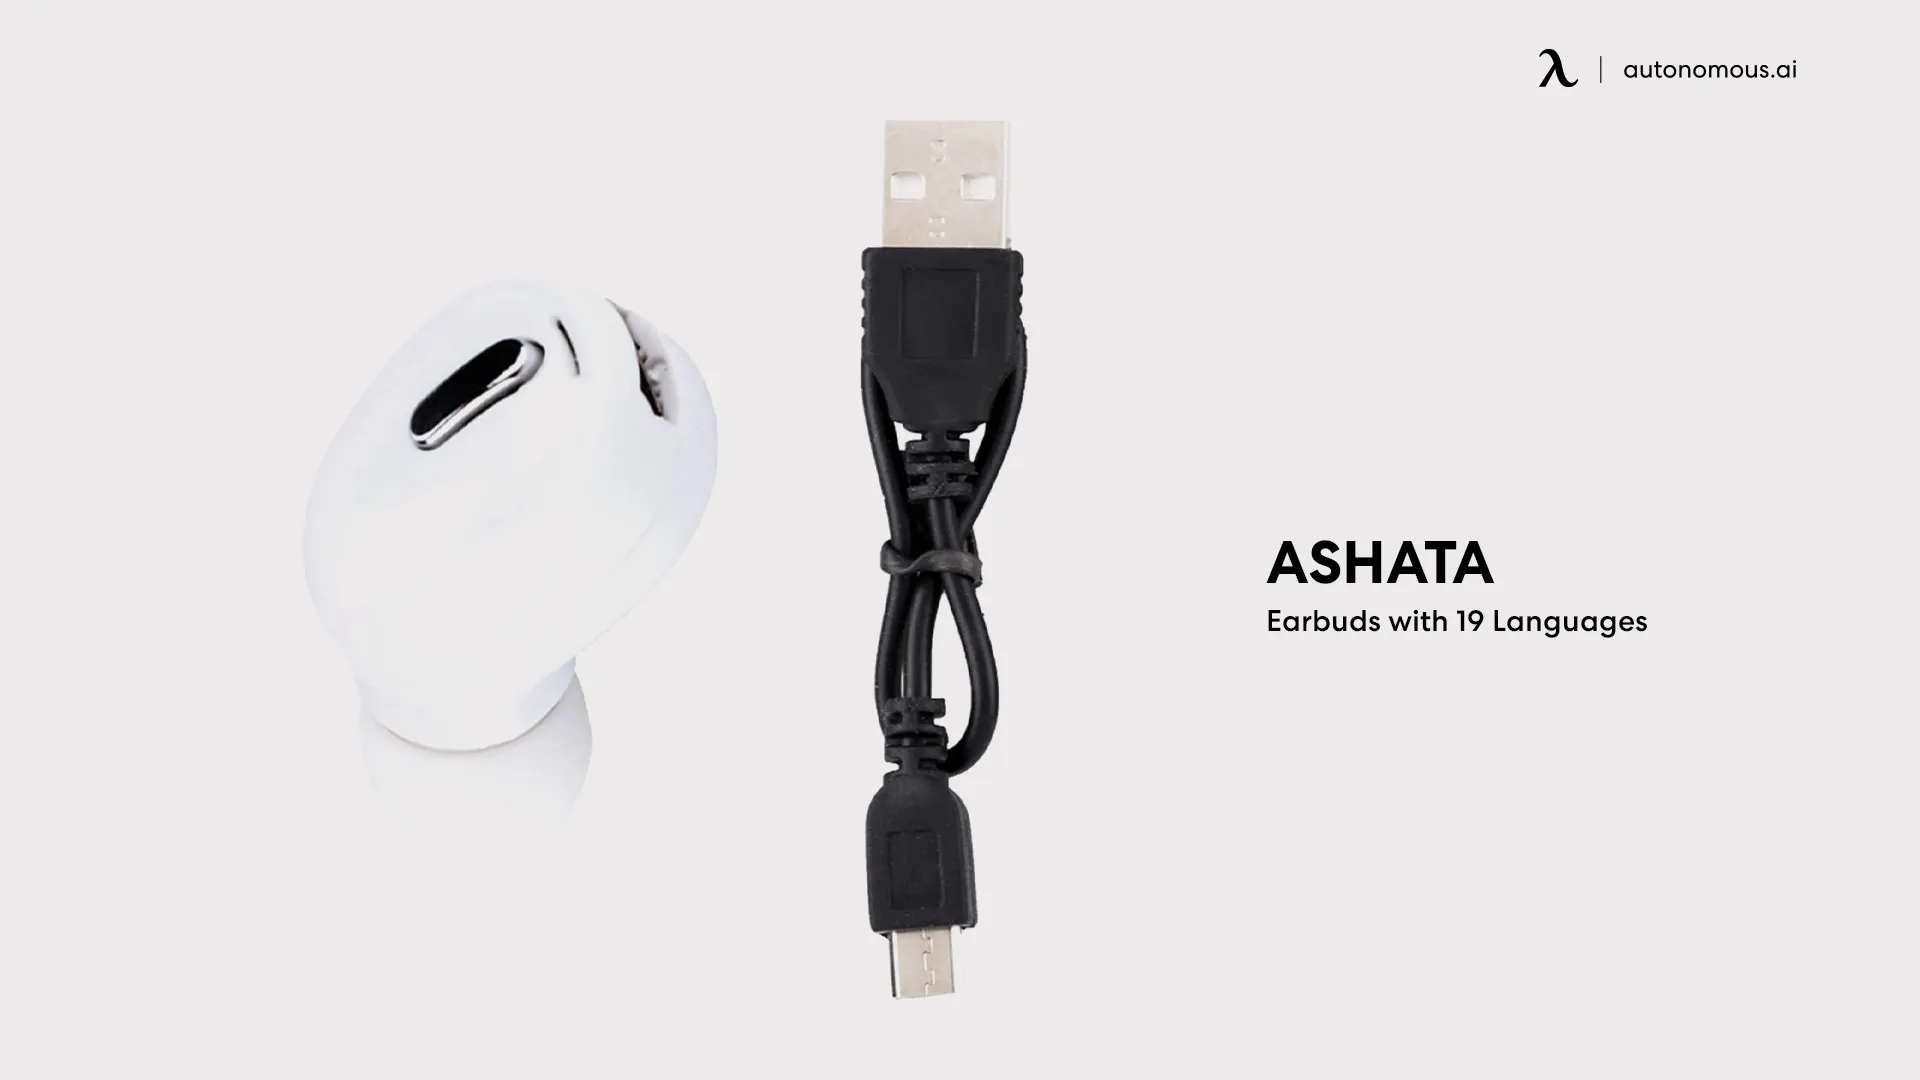 ASHATA Earbuds with 19 Languages